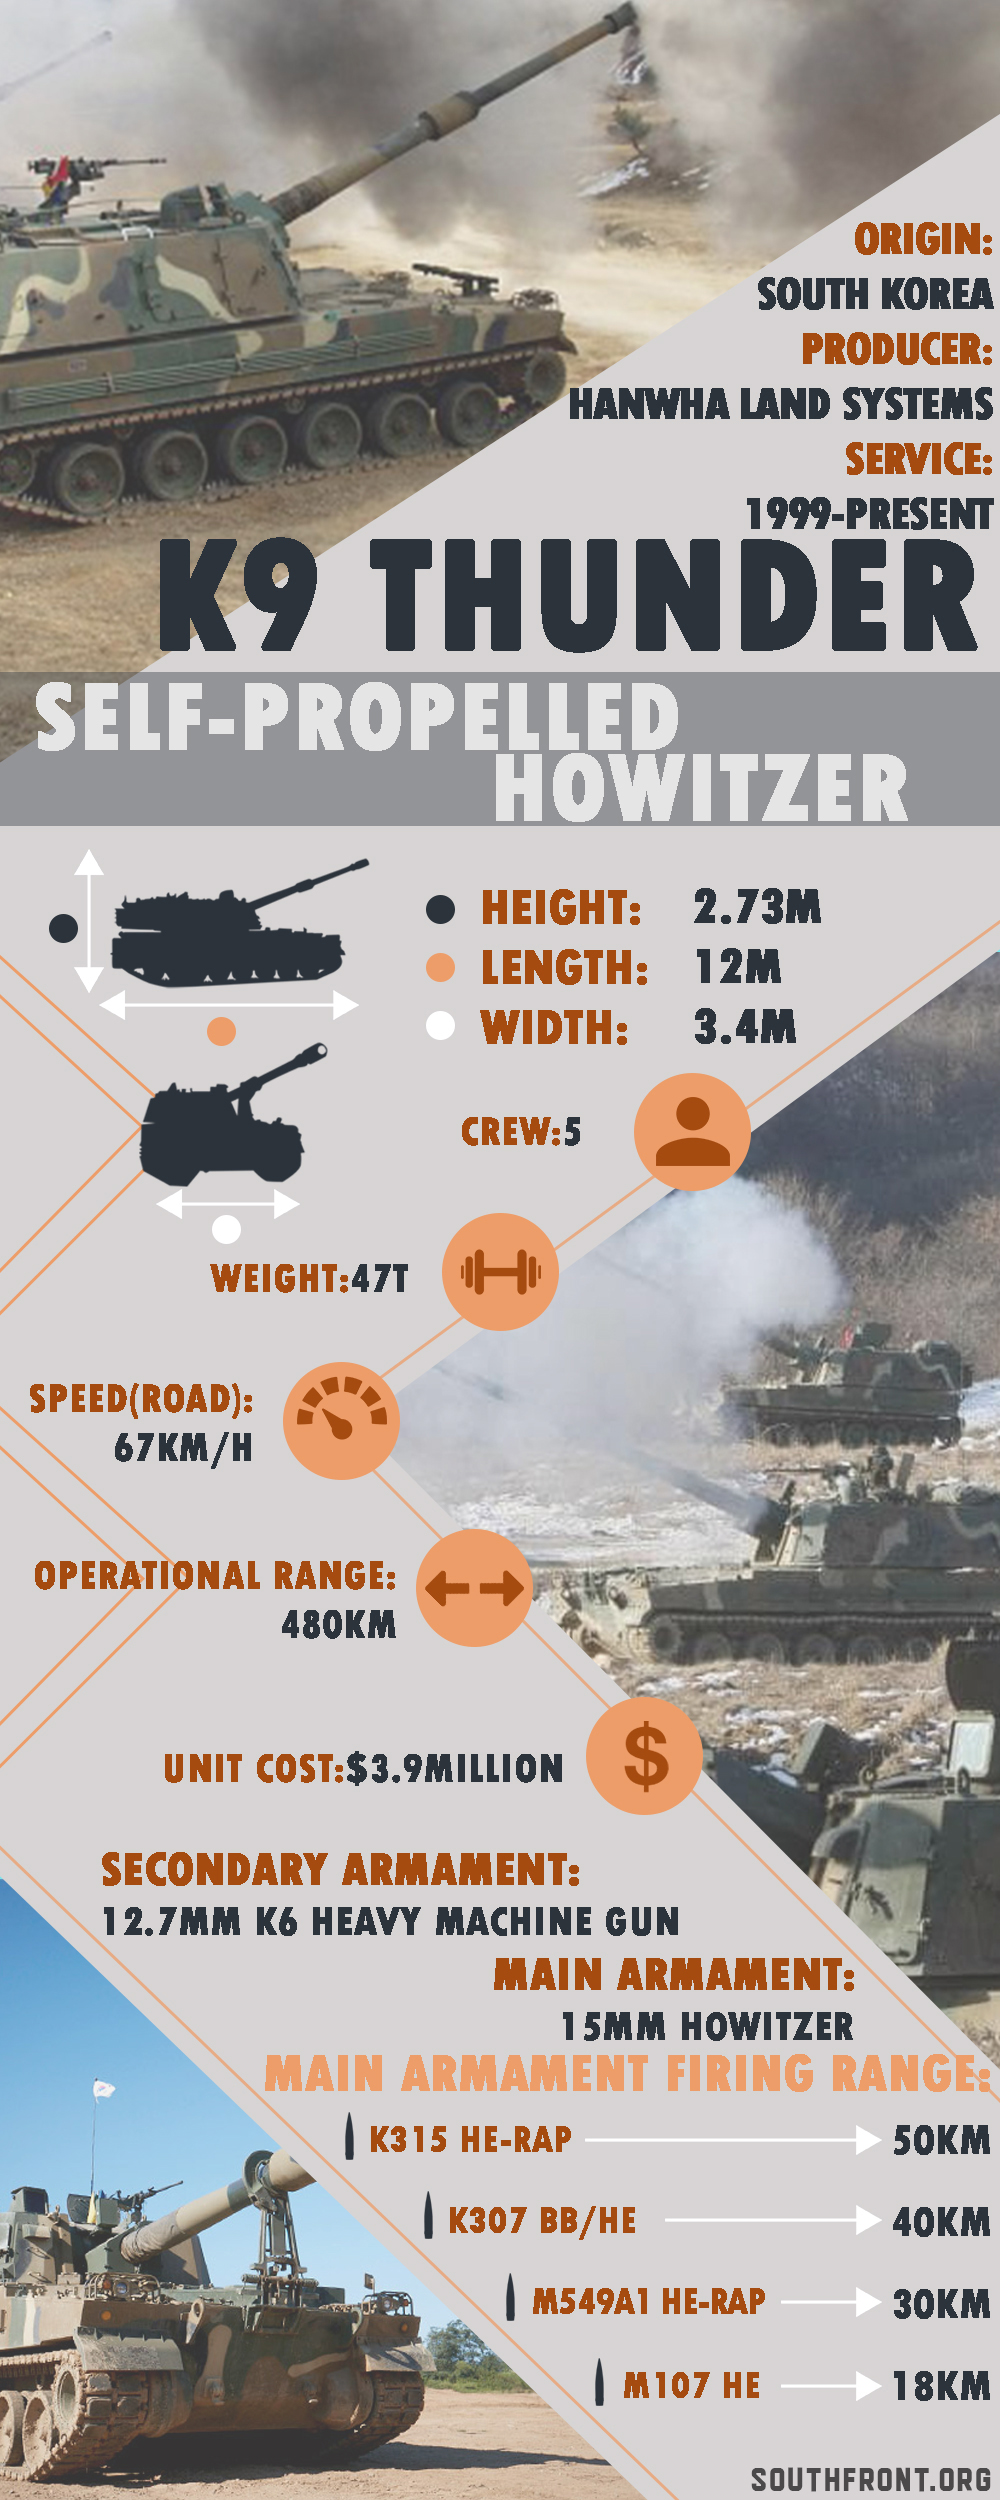 Egypt Signs $1.65 Billion Deal For K9 Howitzers From South Korea